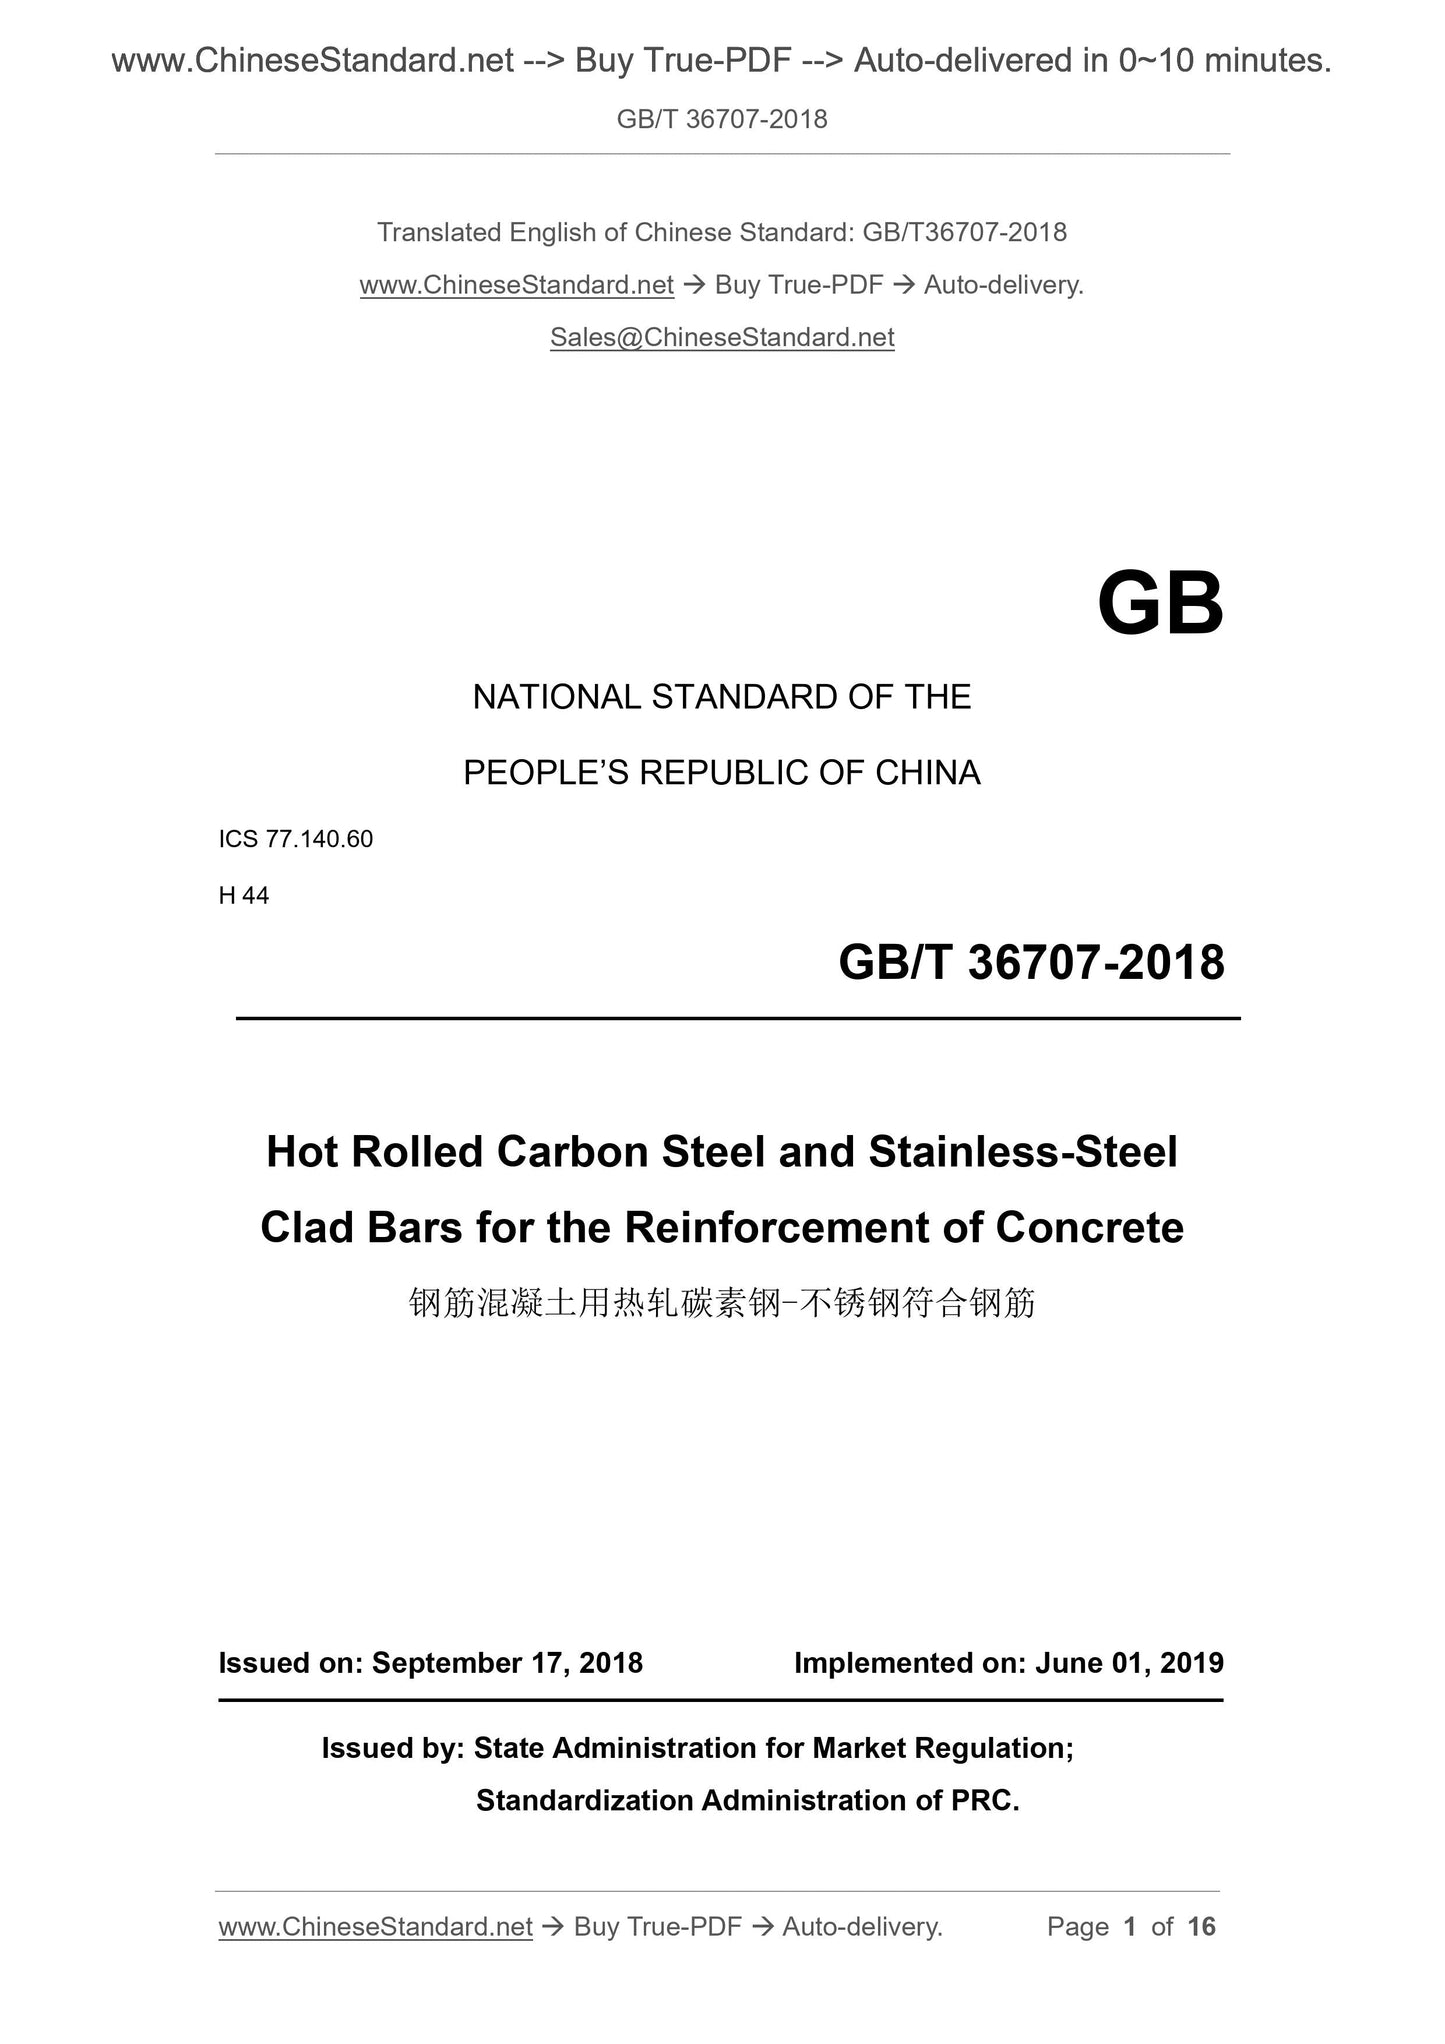 GB/T 36707-2018 Page 1